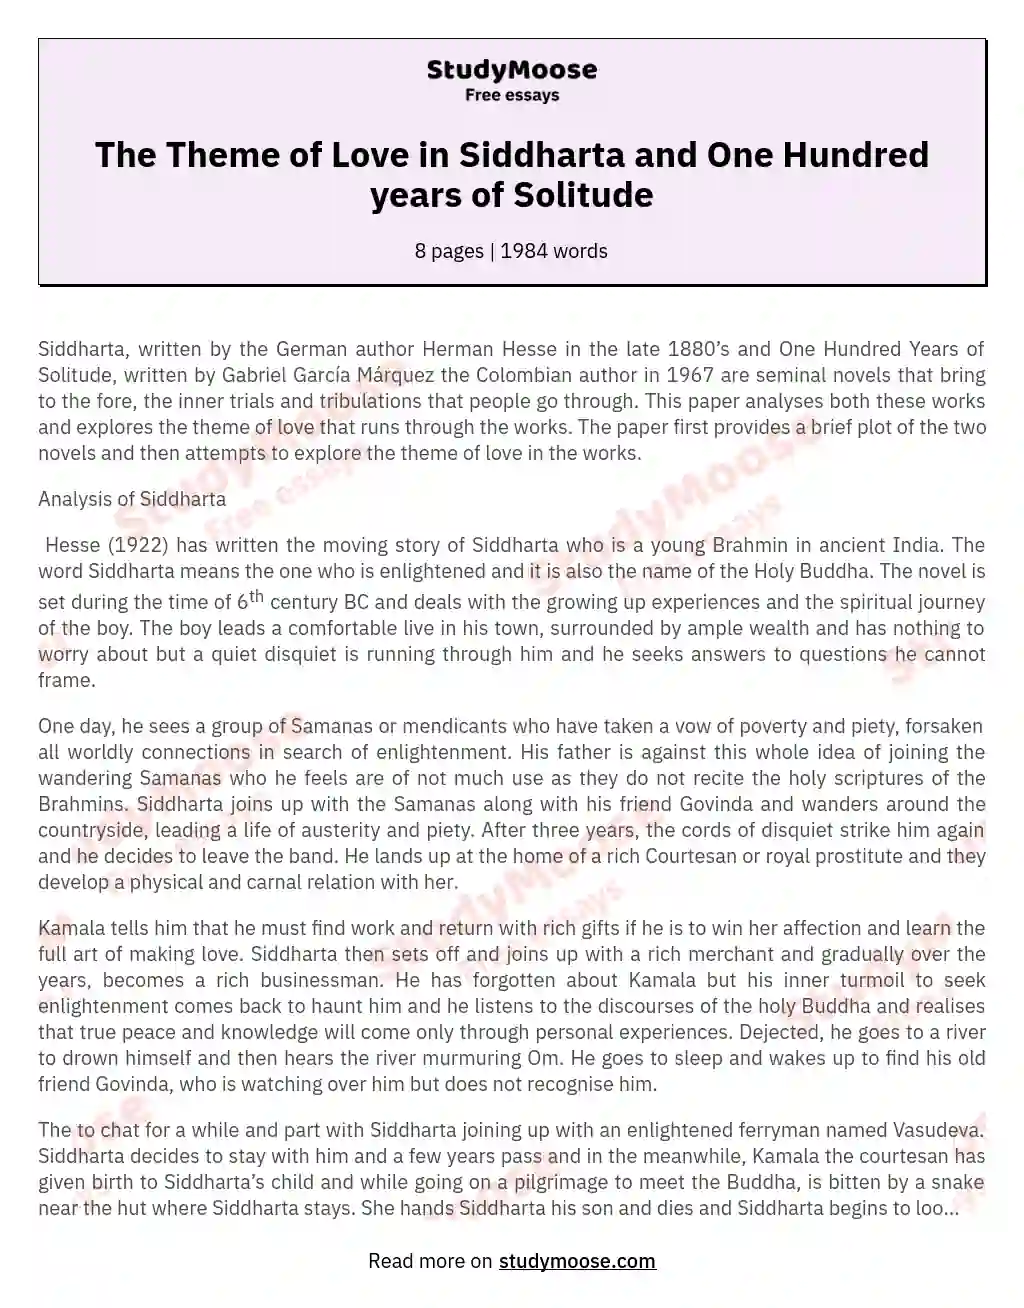 The Theme of Love in Siddharta and One Hundred years of Solitude